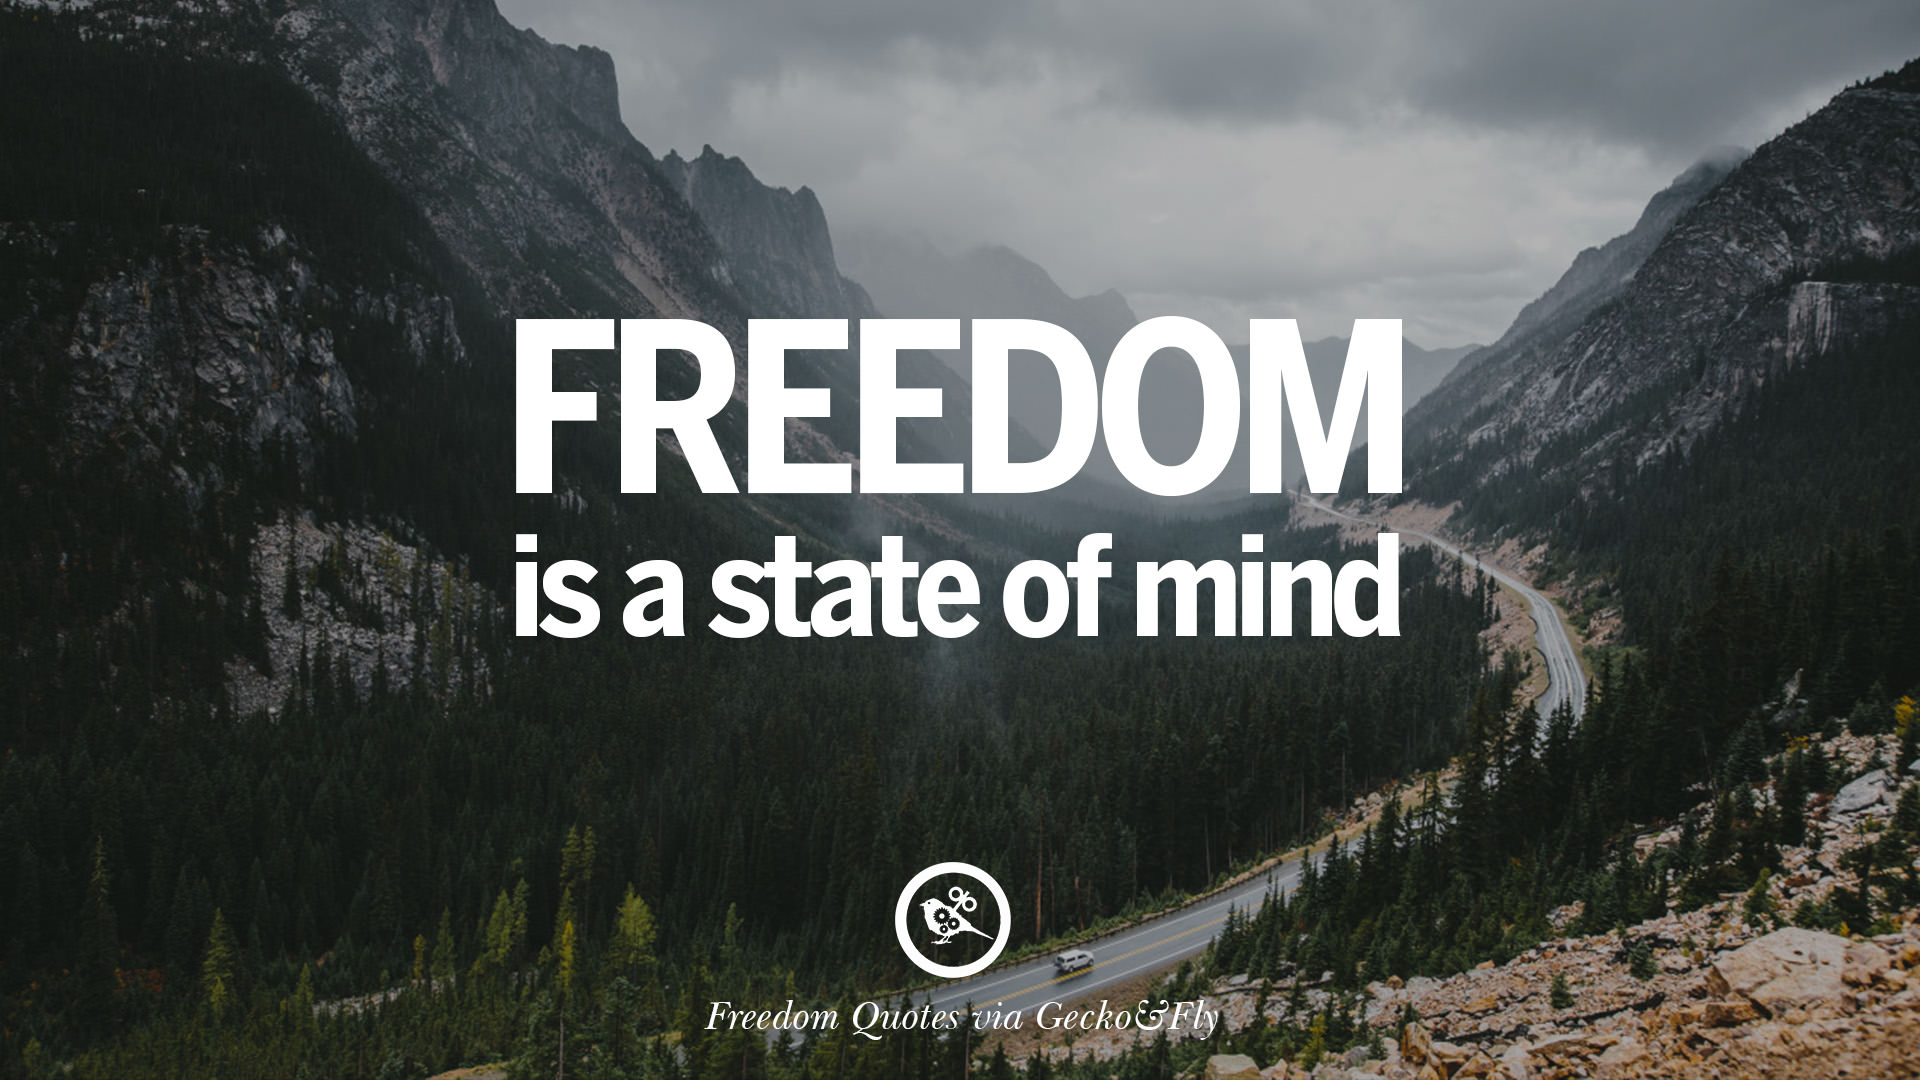 30 Inspiring Quotes About Freedom And Liberty